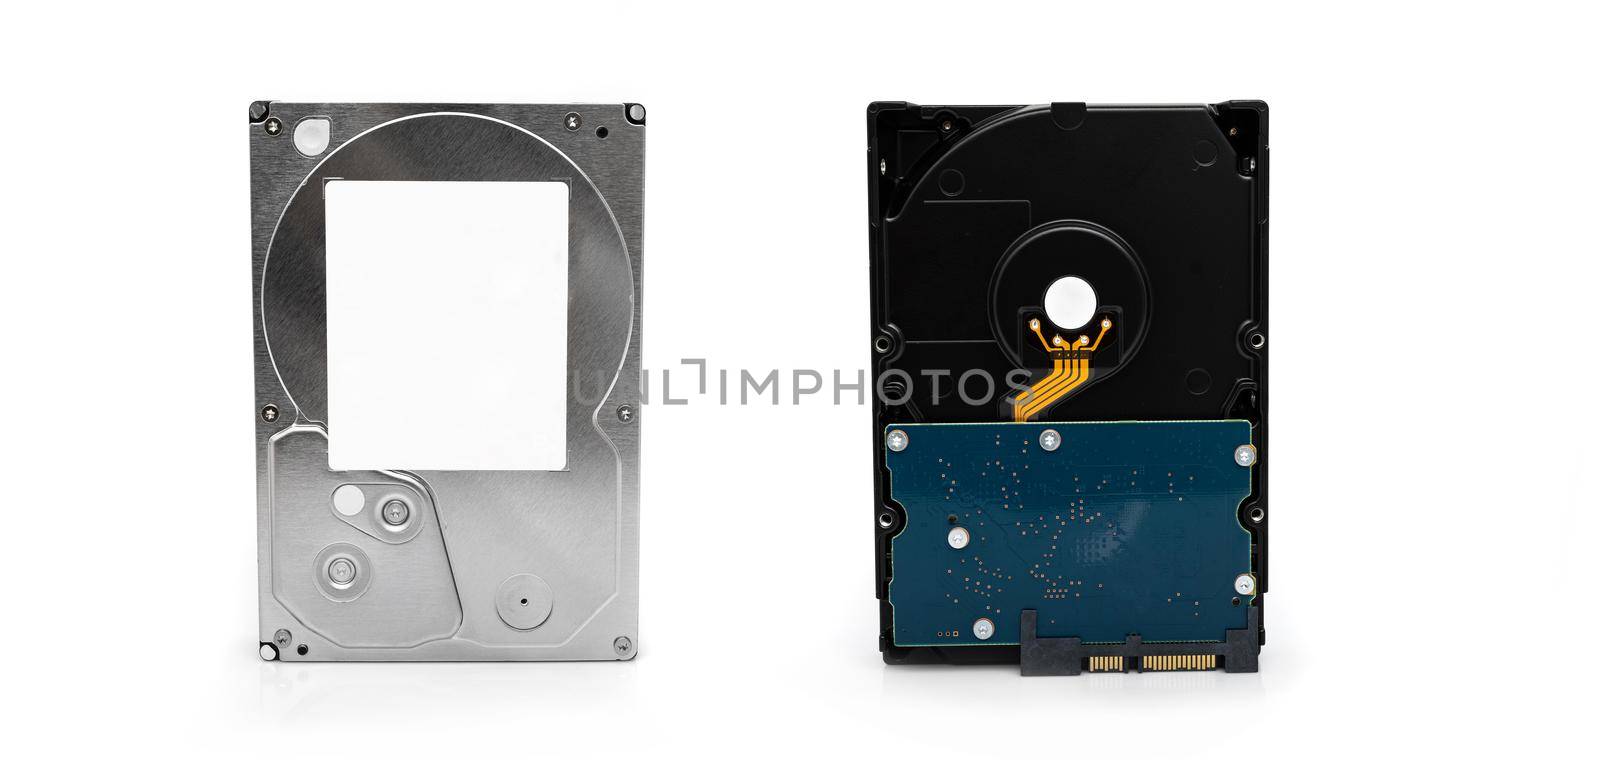 Hardware disk HDD datum for computer PC isolated on white background, view from both sides. Hard drive technology for modern gadget